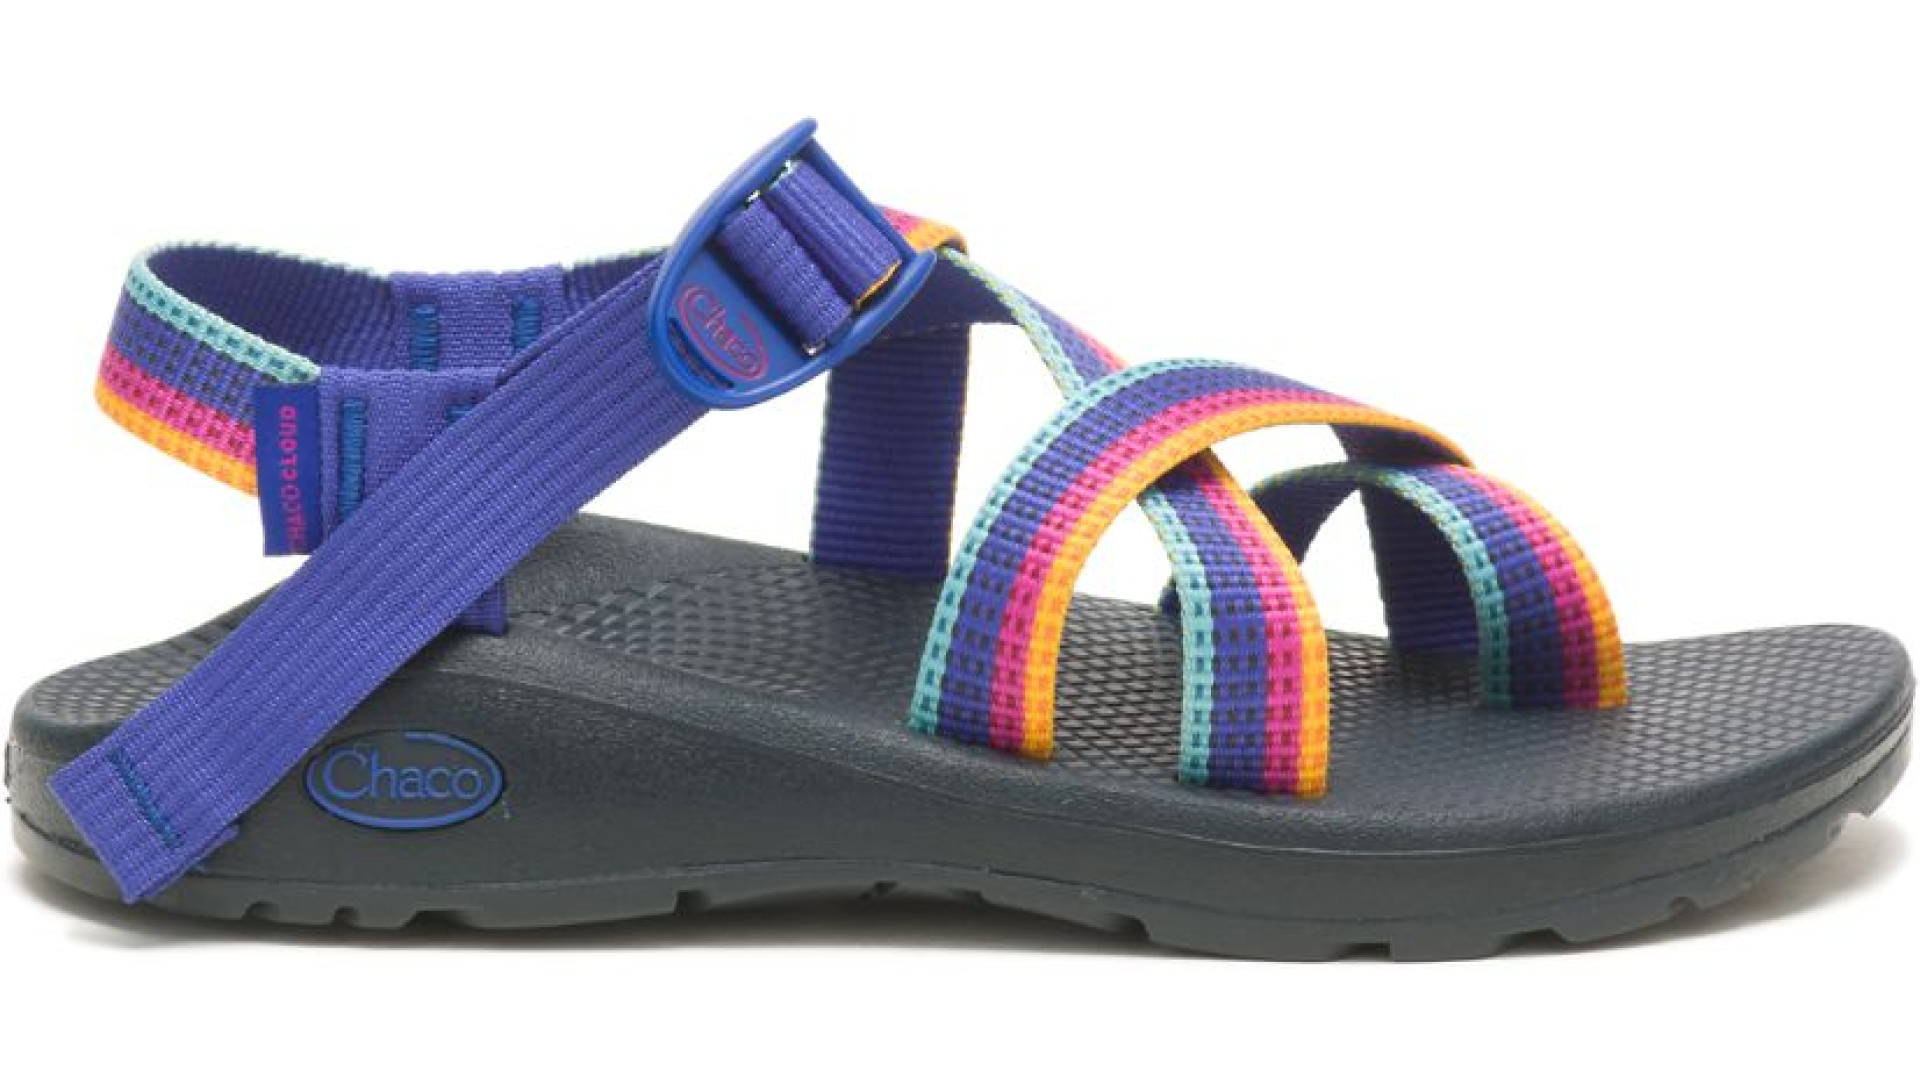 Chacos strappy sandals 